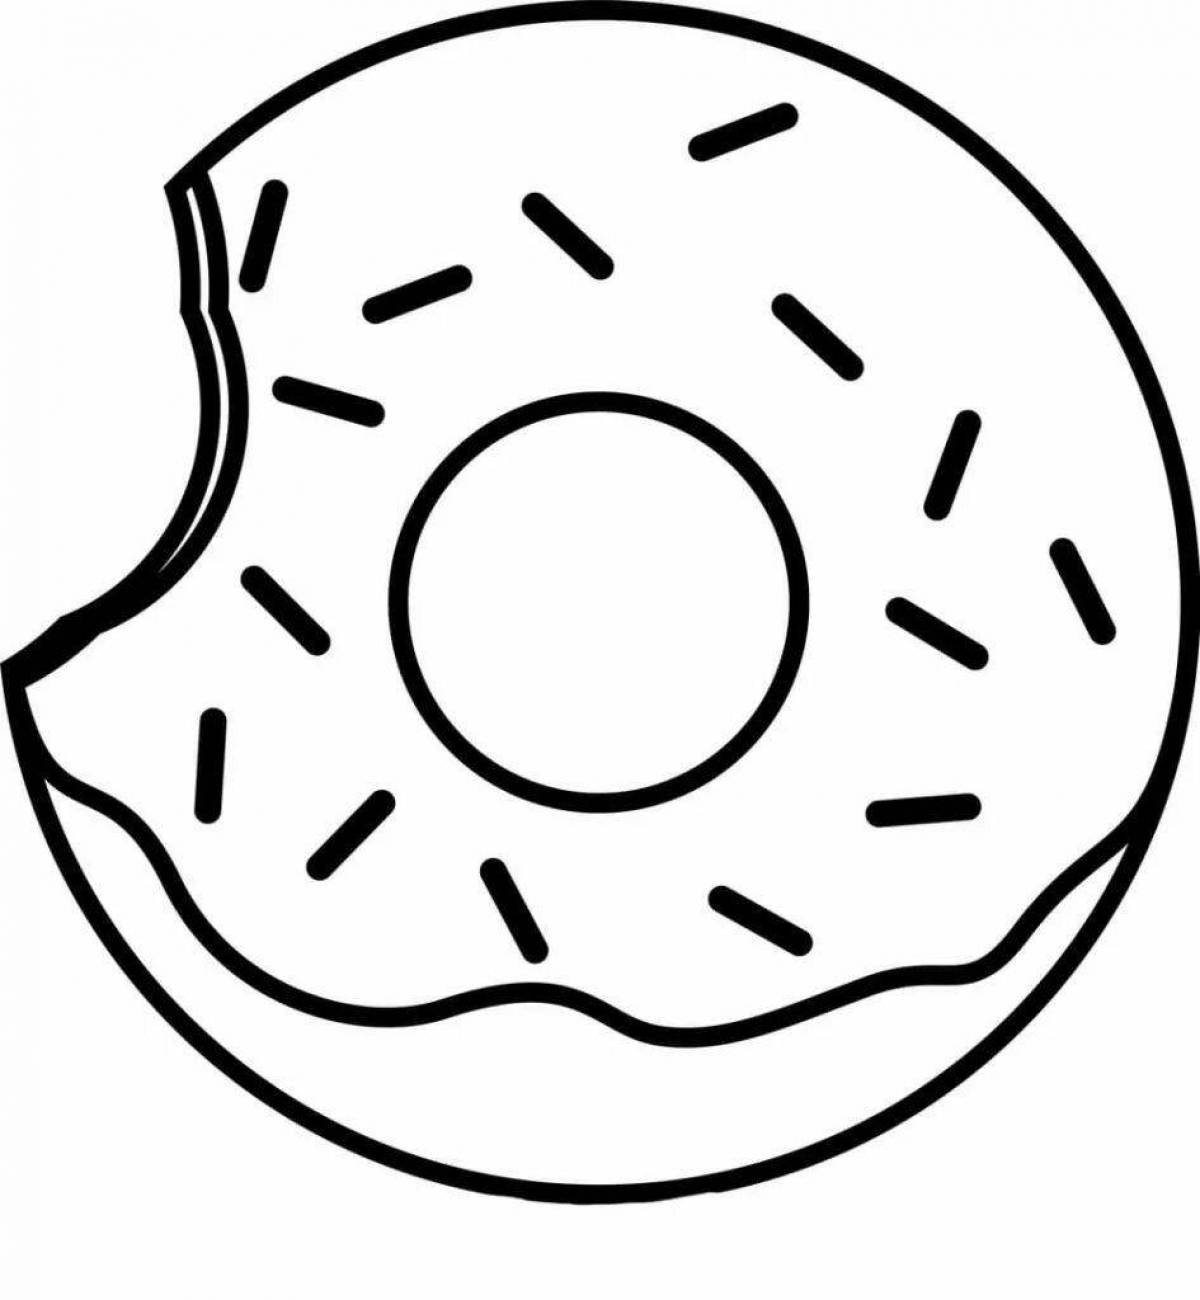 Cute donuts coloring pages for kids